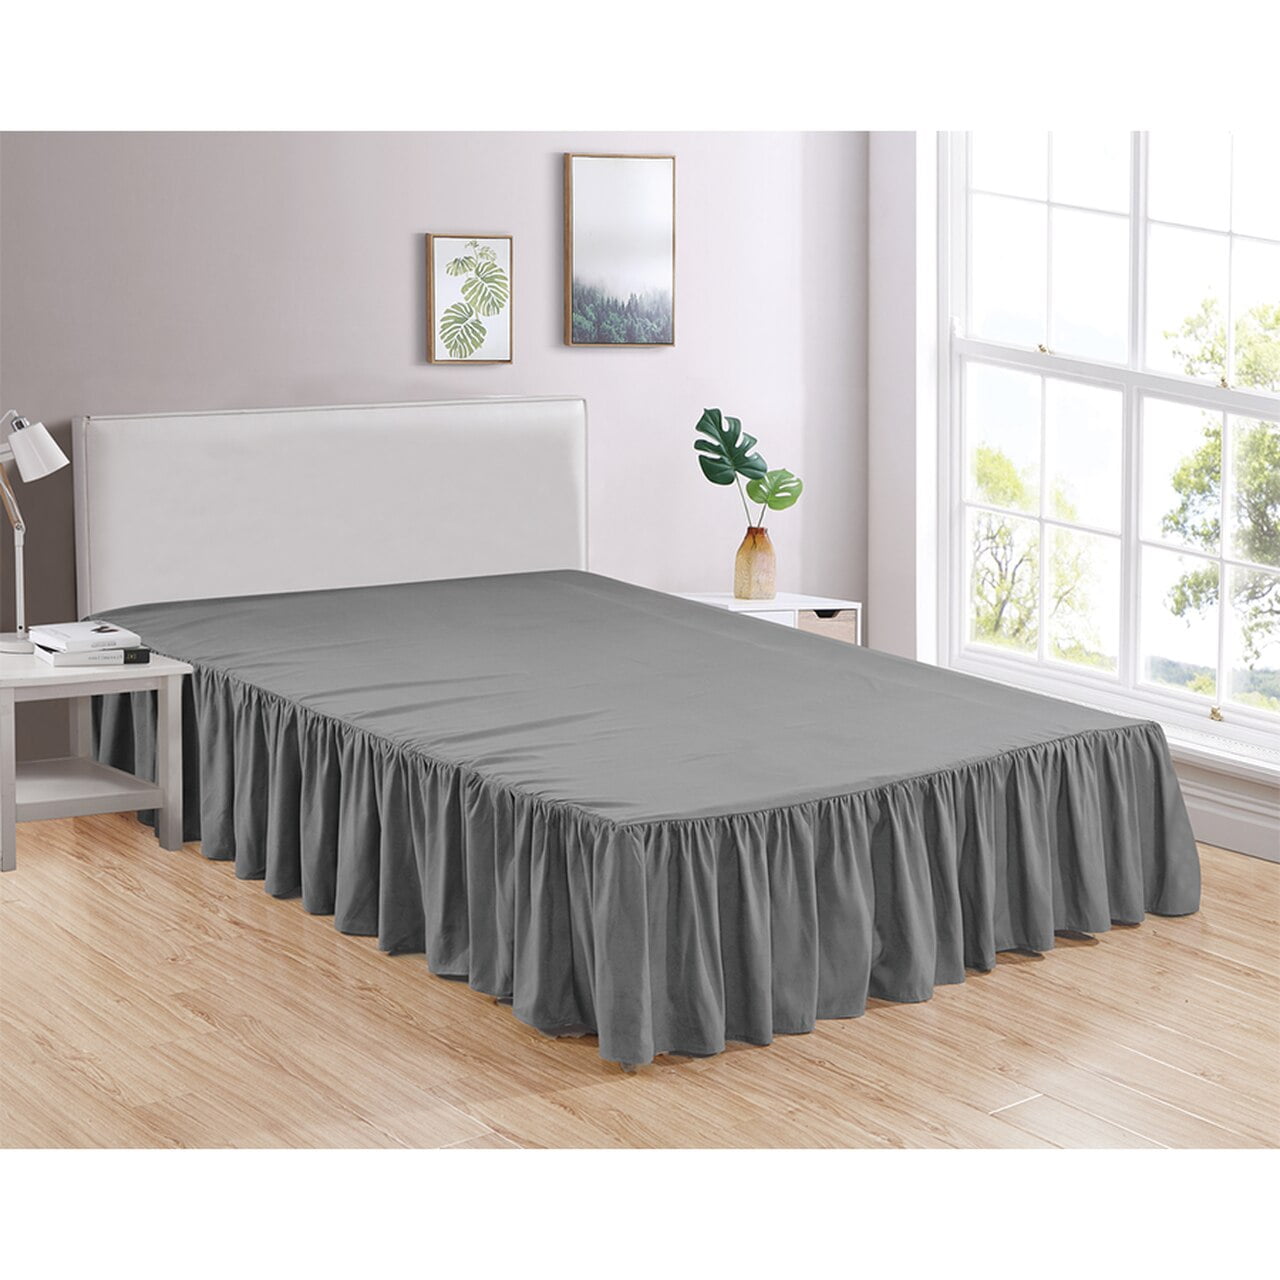 Bed Skirt Ruffle Brushed Microfiber 10 Inches Deep Easy fits 